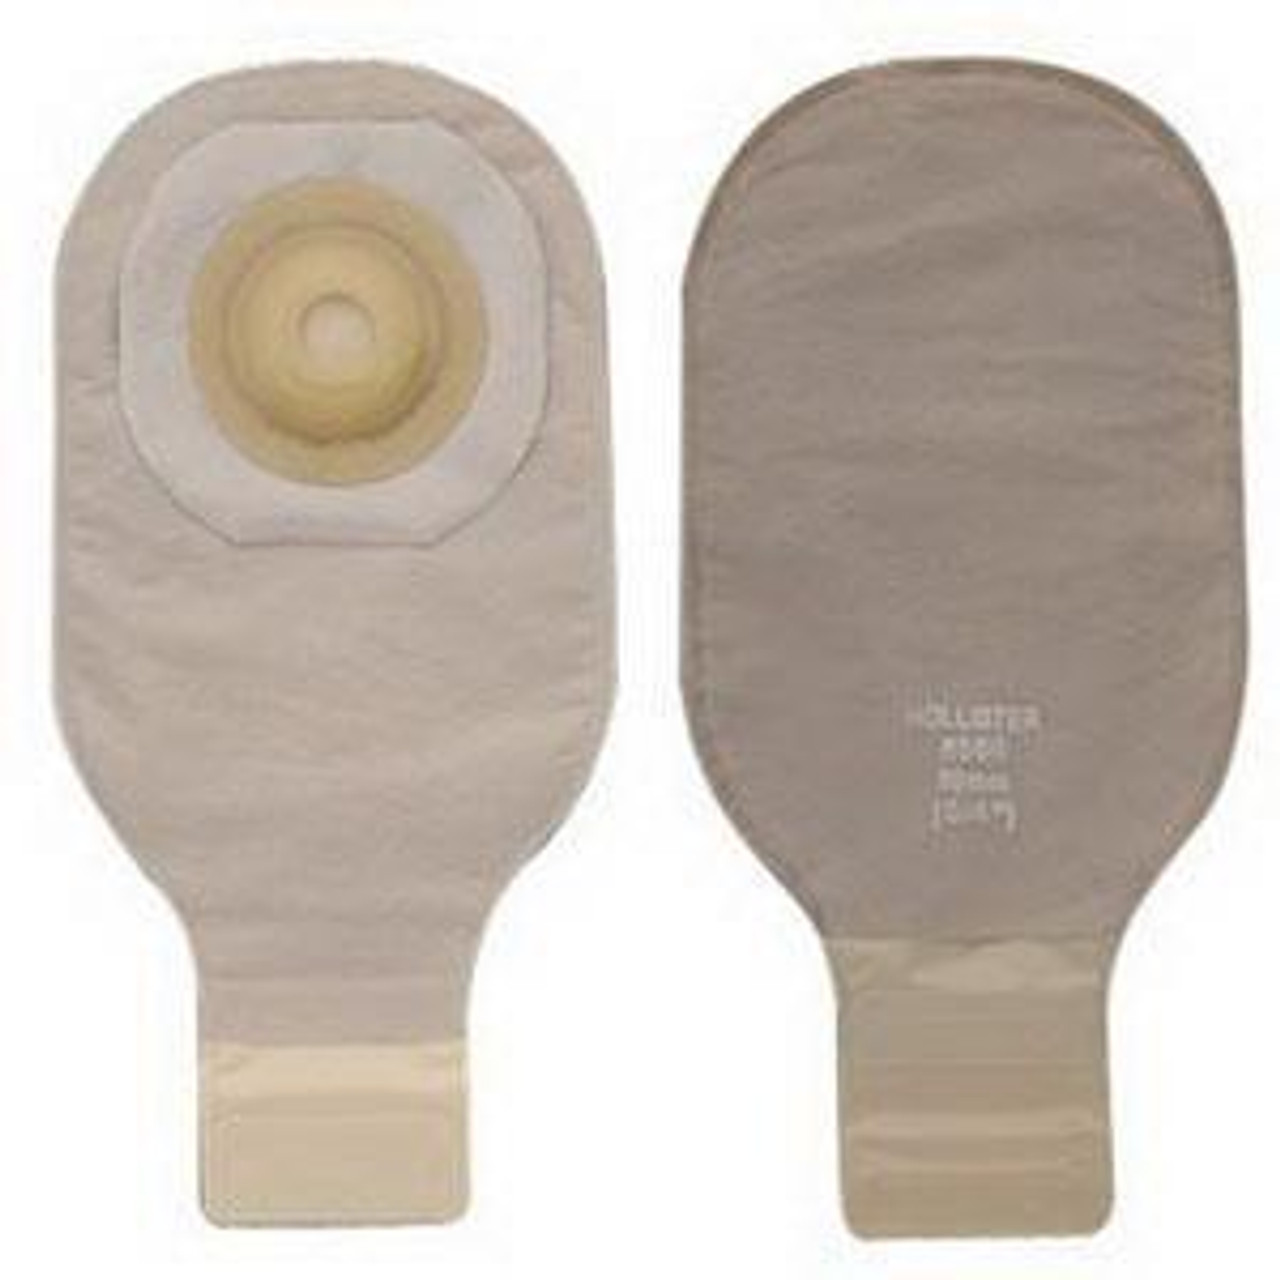 CONVEX Drainable Pouch, Pre-sized 1 1/8", BEIGE, LOCK-N-ROLL BX/5 (HOL-8593) (Hollister 8593)